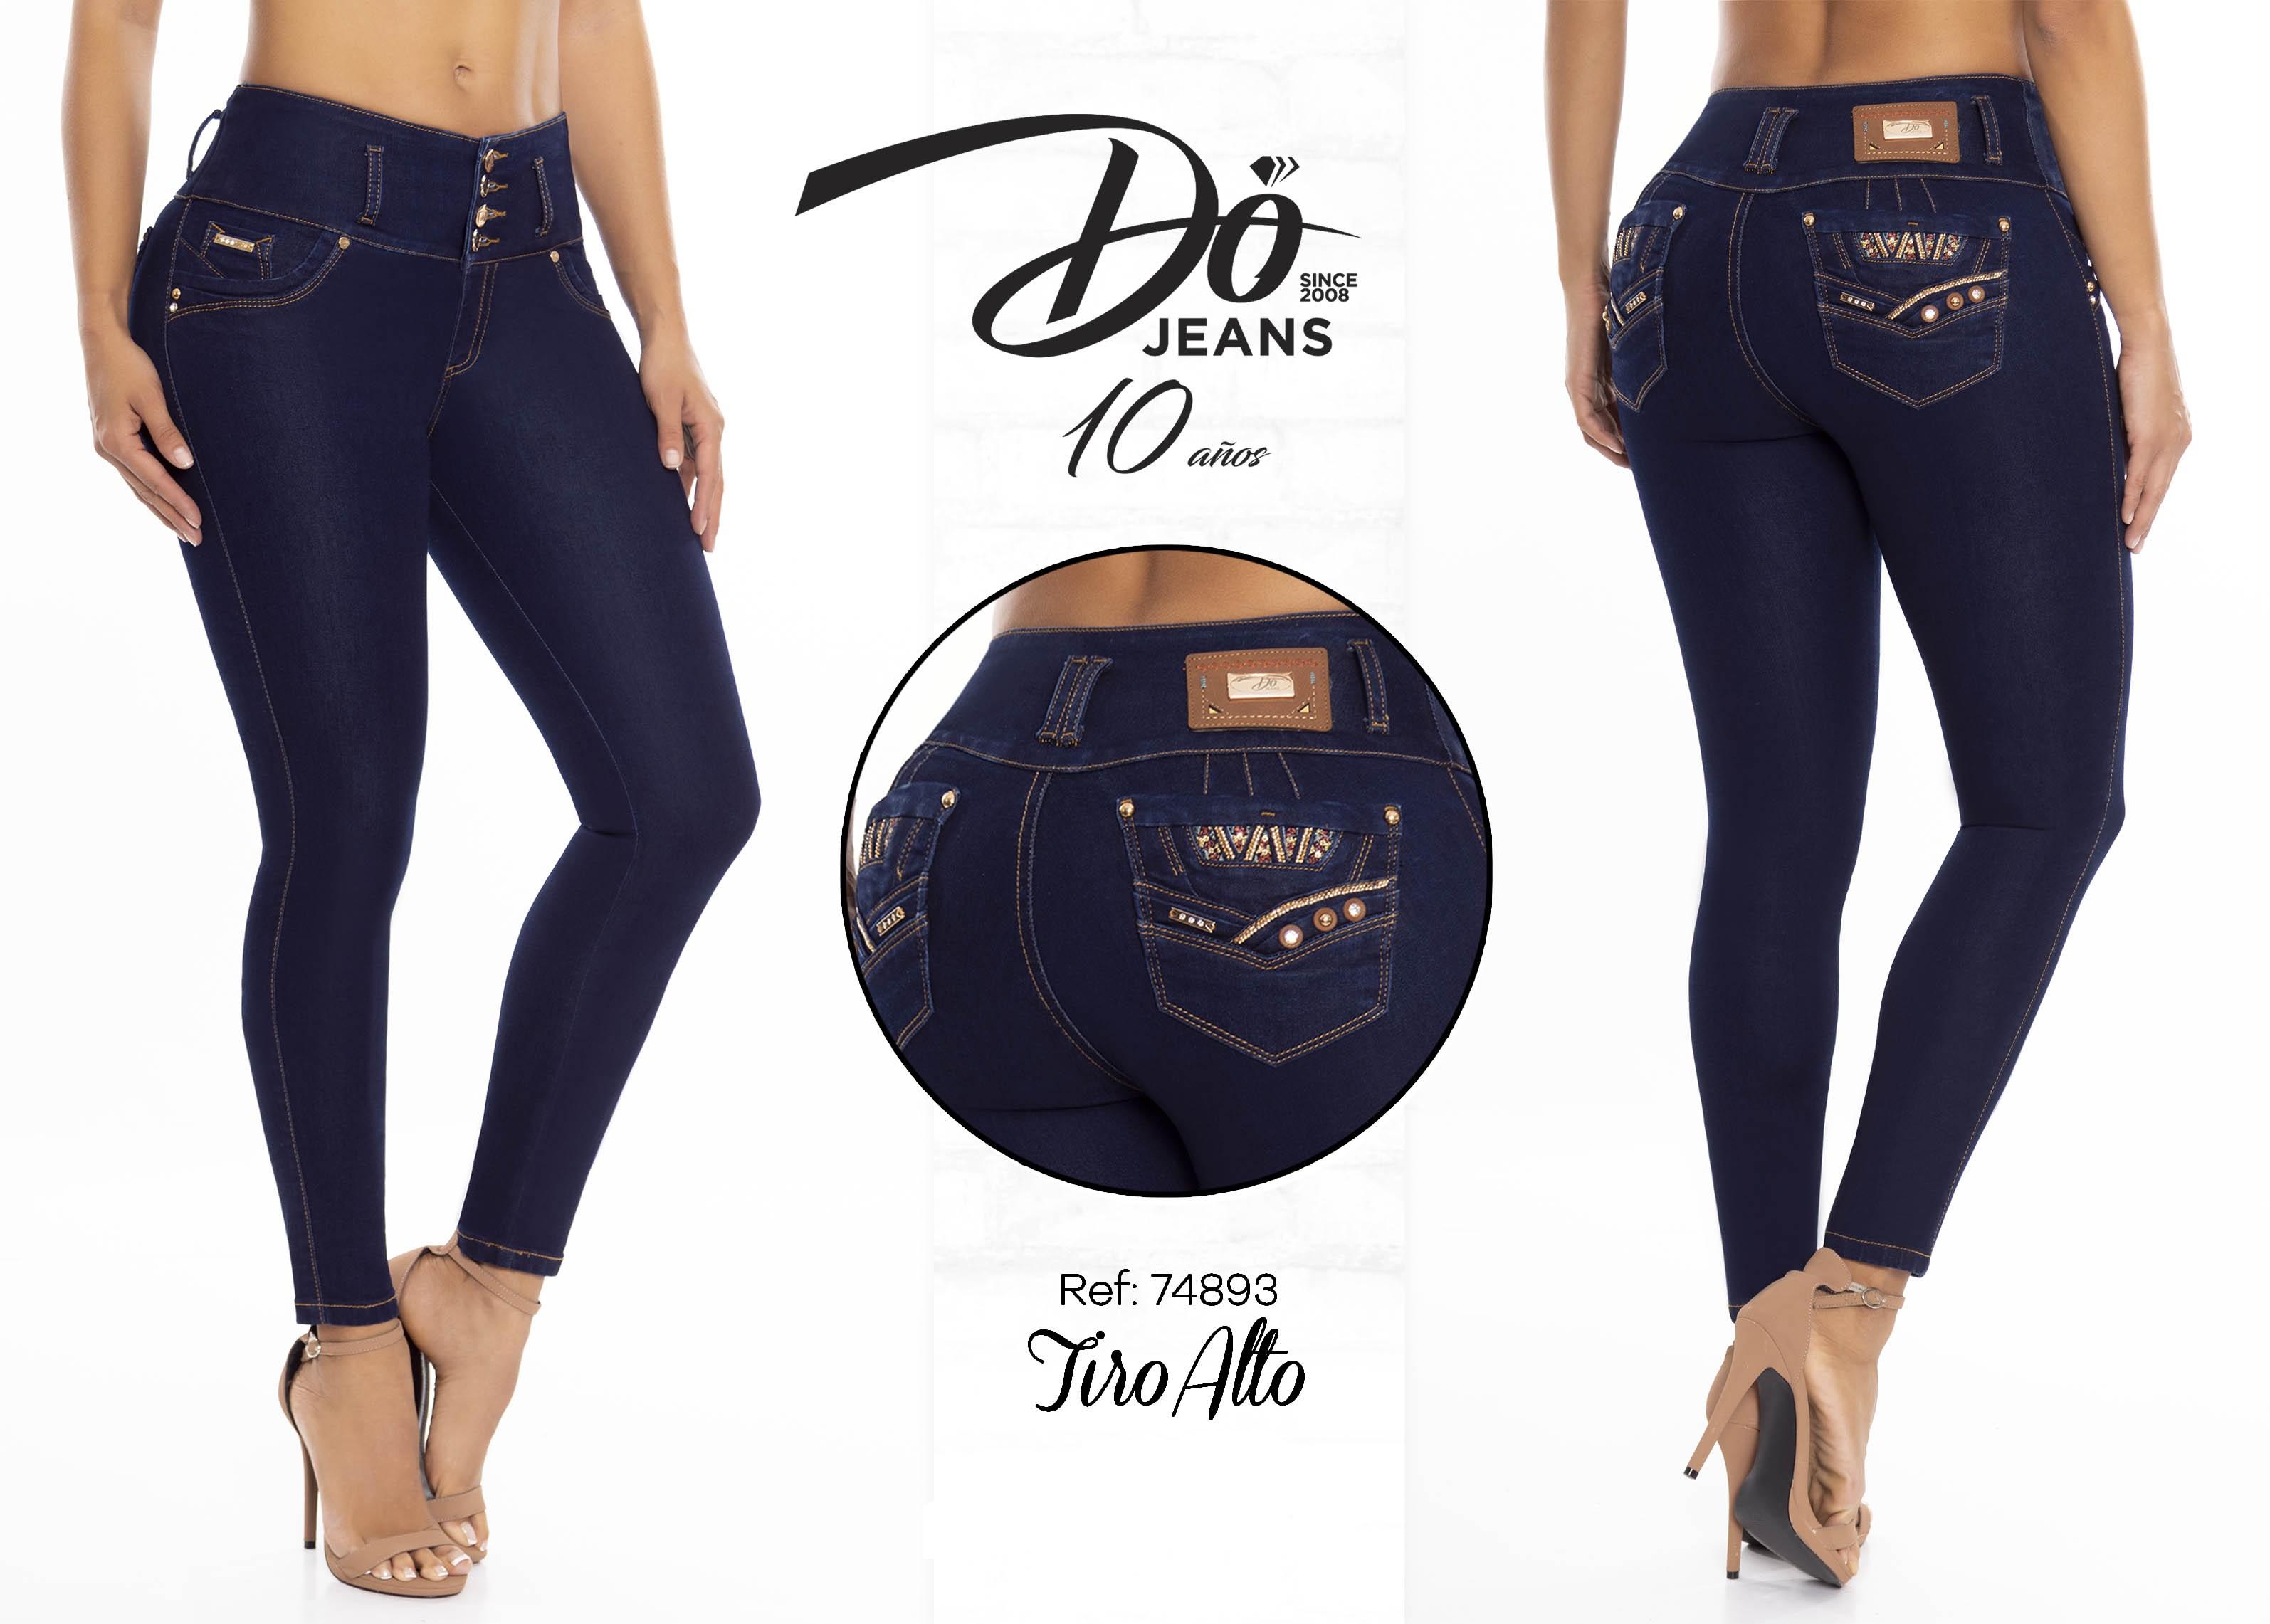 Jeans Levantacola Colombiano - Ref. 248 -74893 D